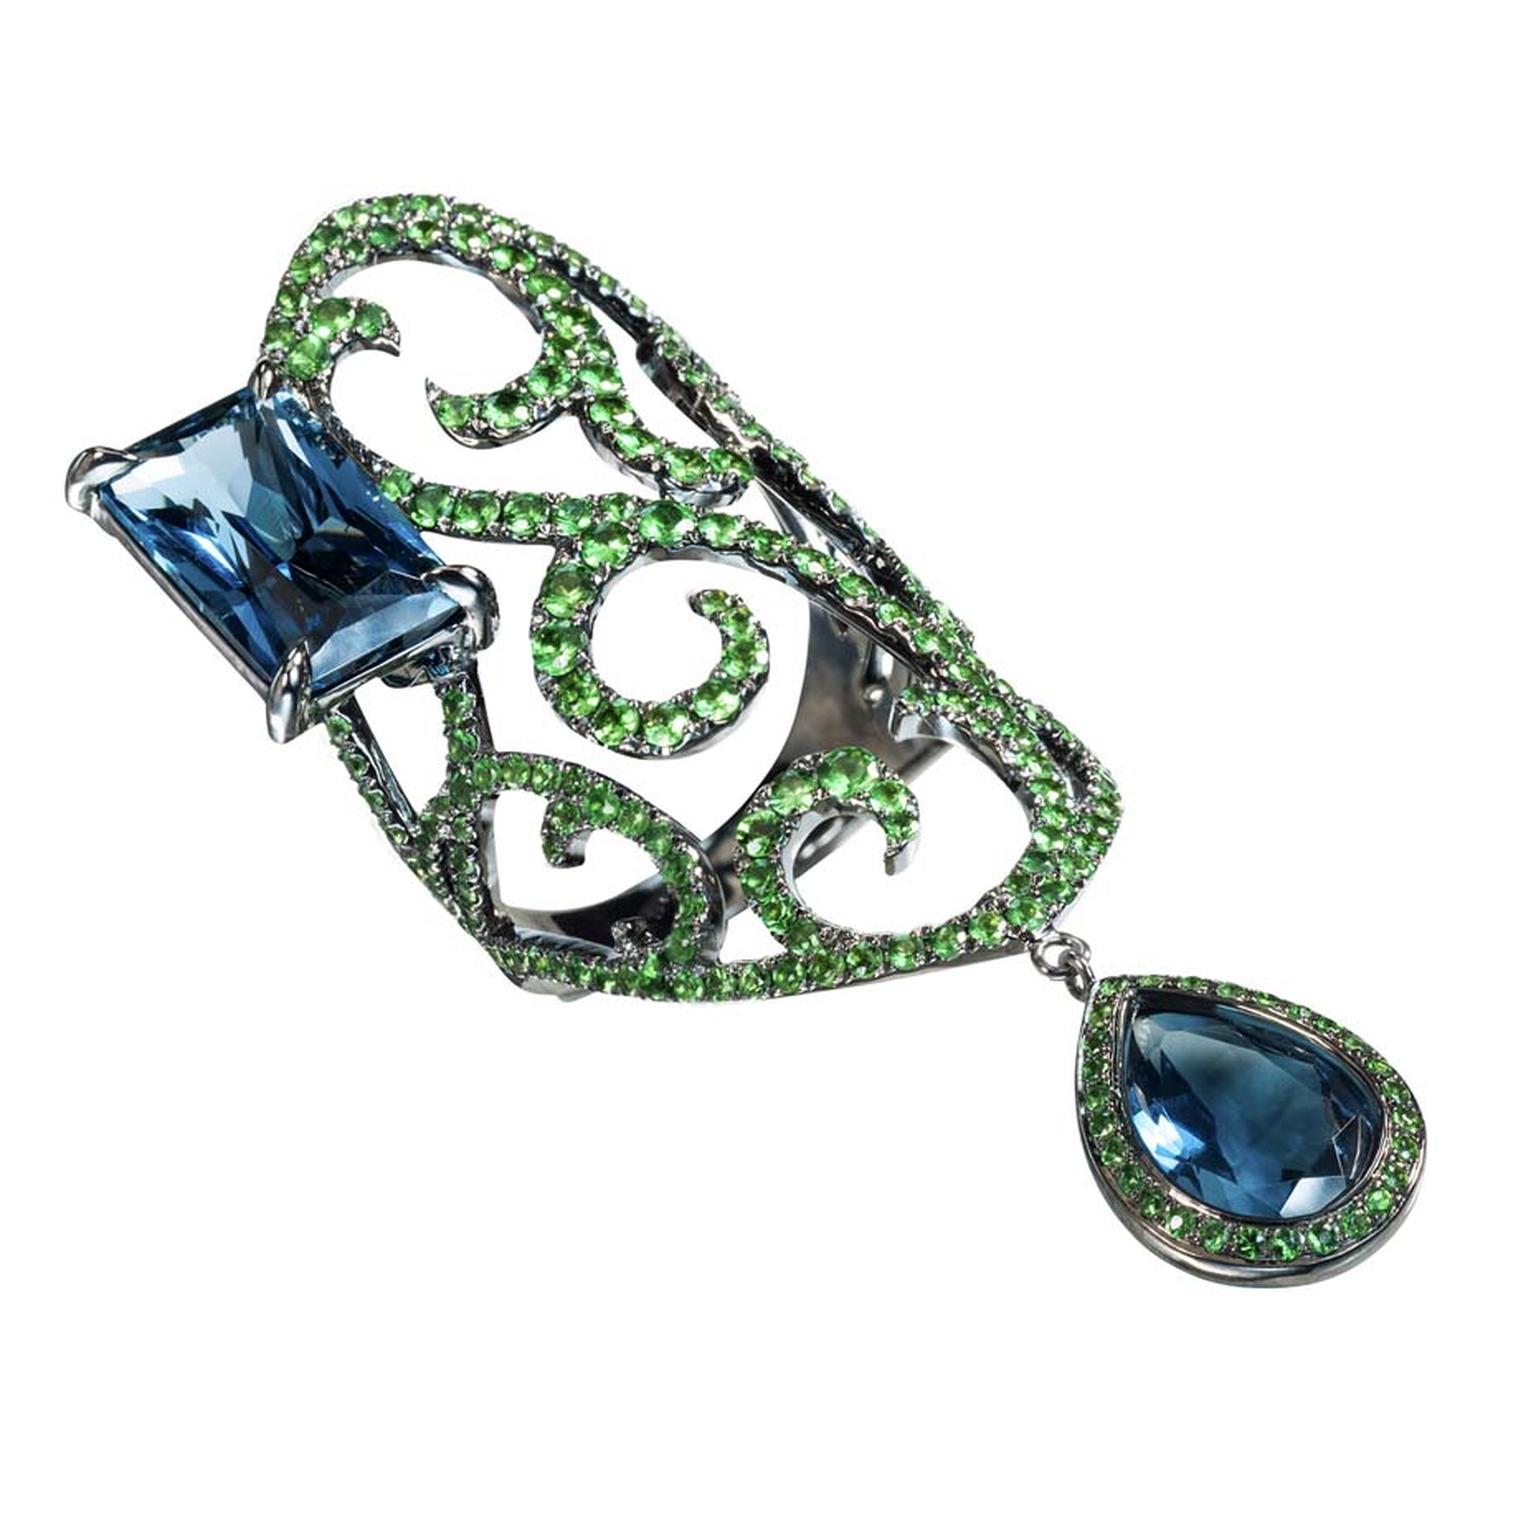 Dionea Orcini white gold arabesque Jaipur ring featuring tsavorites and London blue topaz.